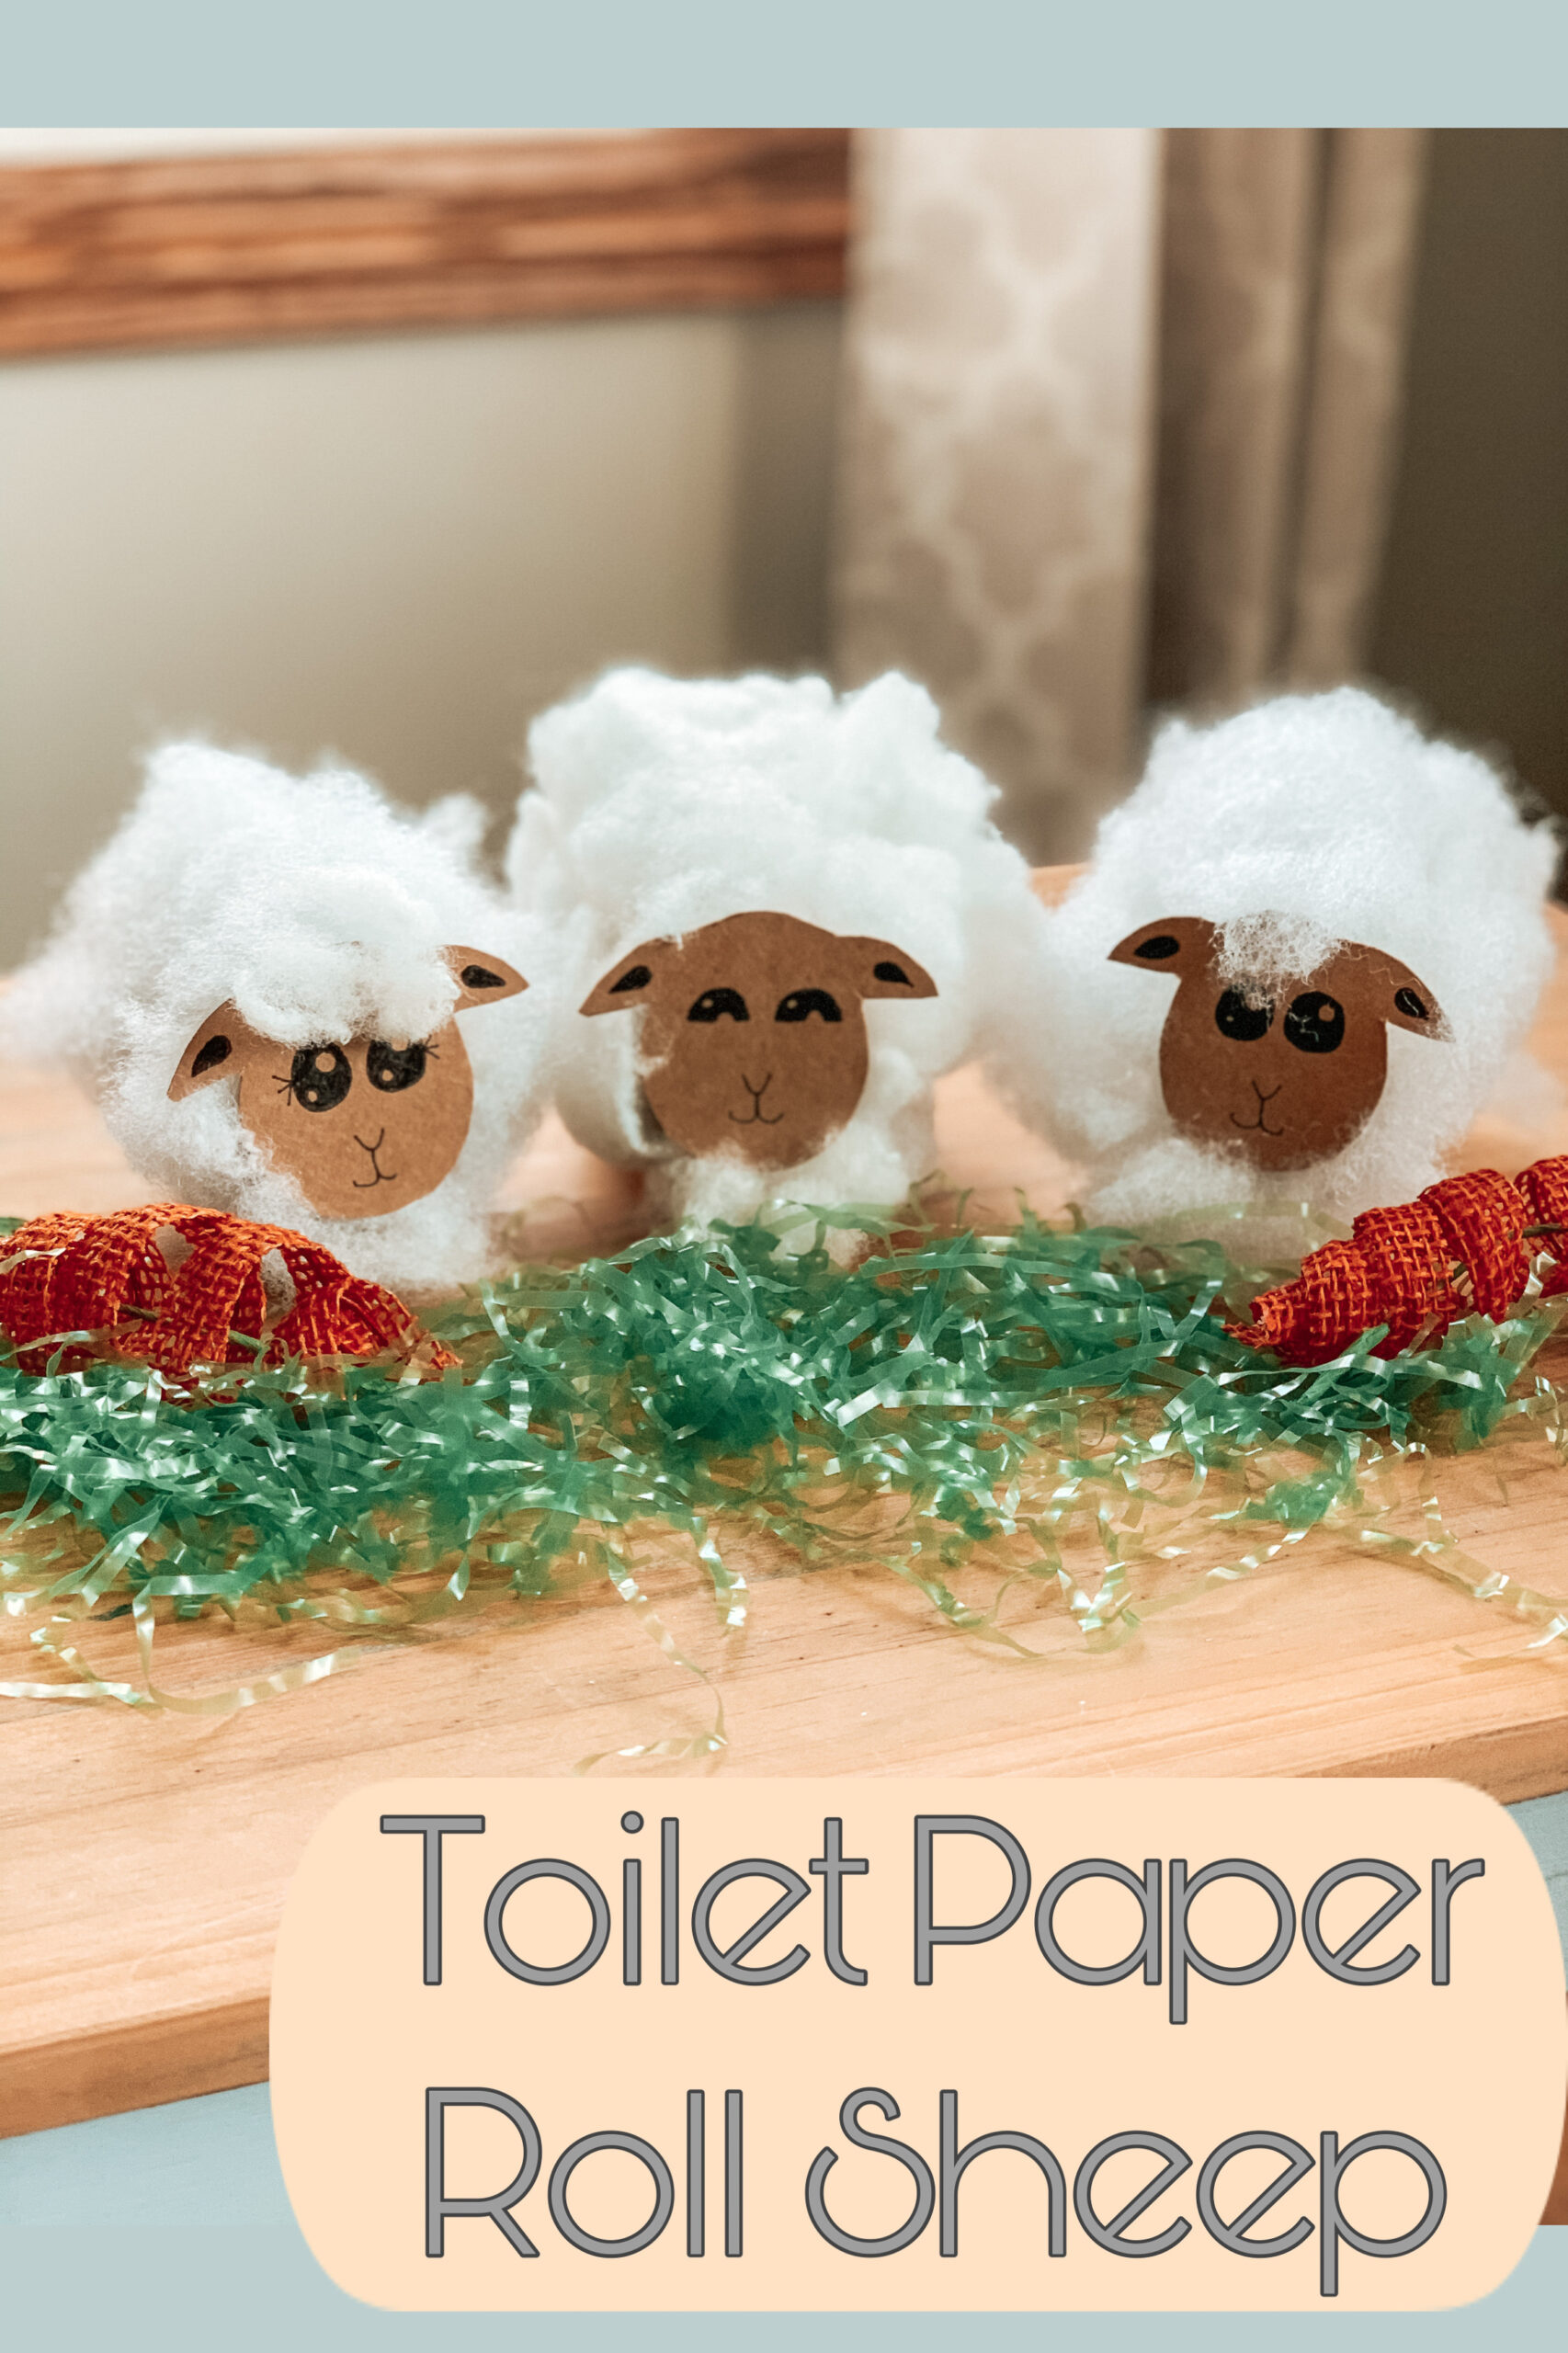 Toilet paper sheep kids craft. Made of toilet paper rolls and pillow stuffing